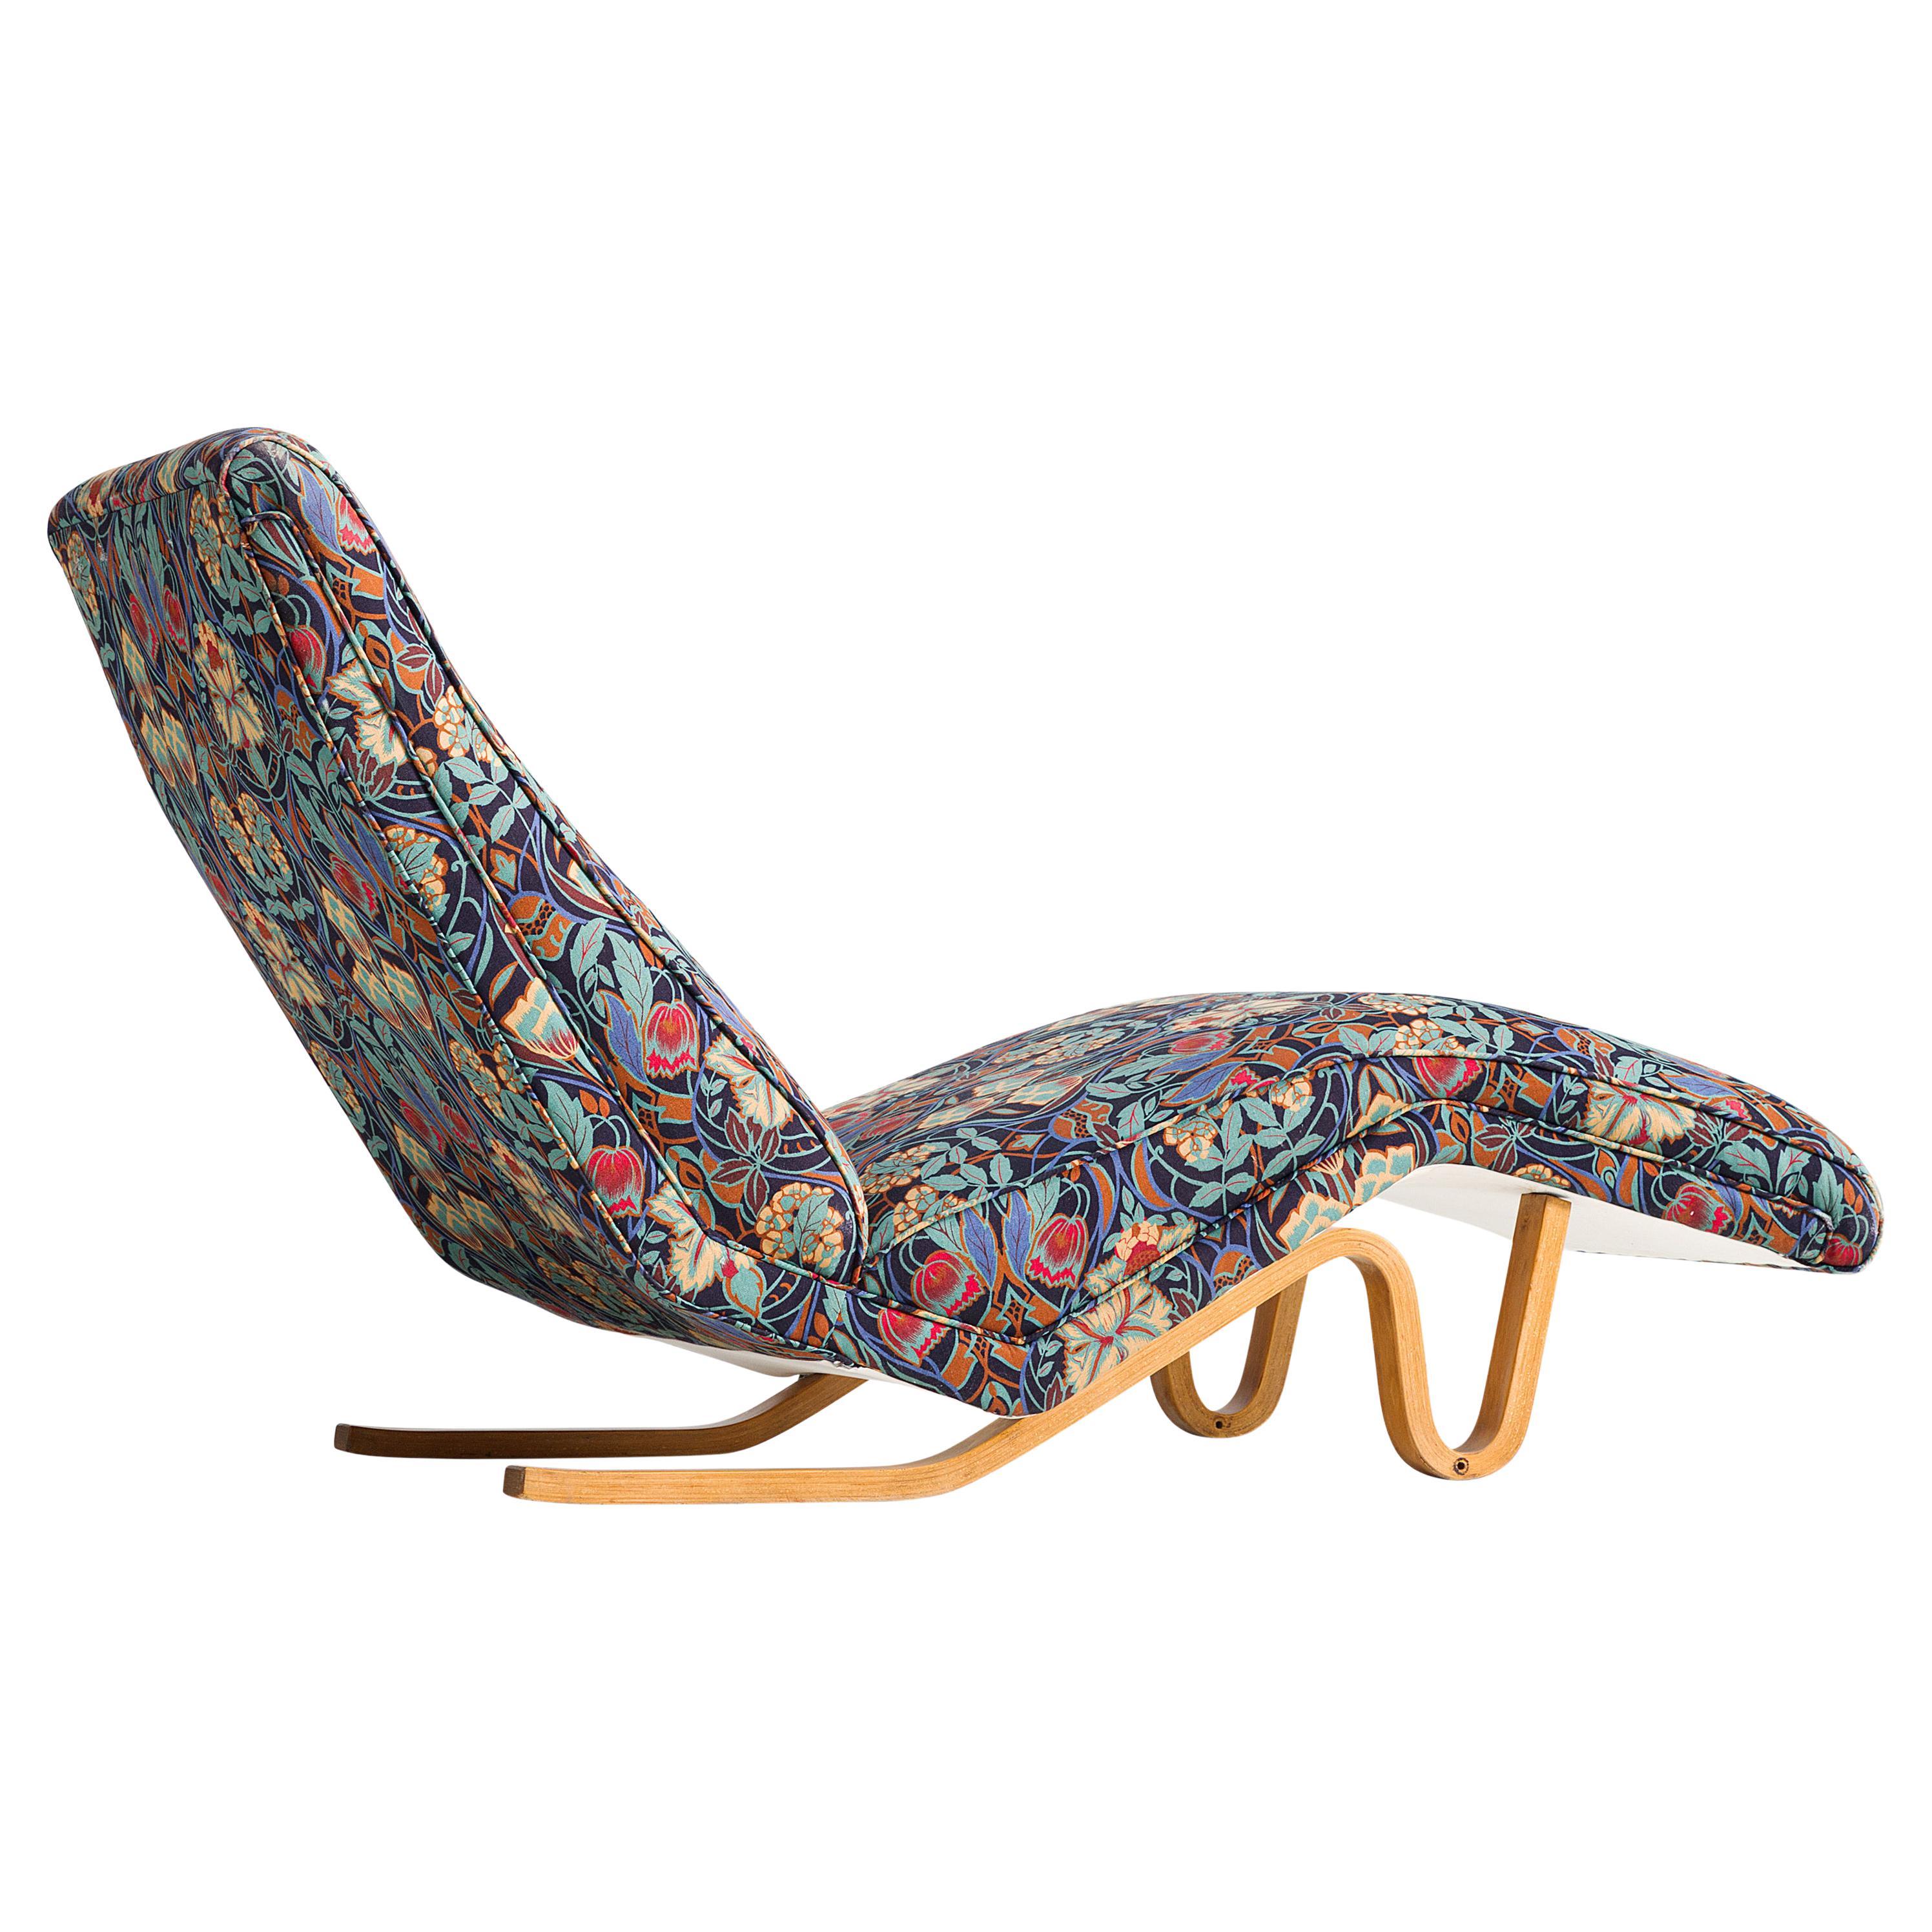 Andrew J. Milne Chaise Lounge in Beech and Floral Fabric